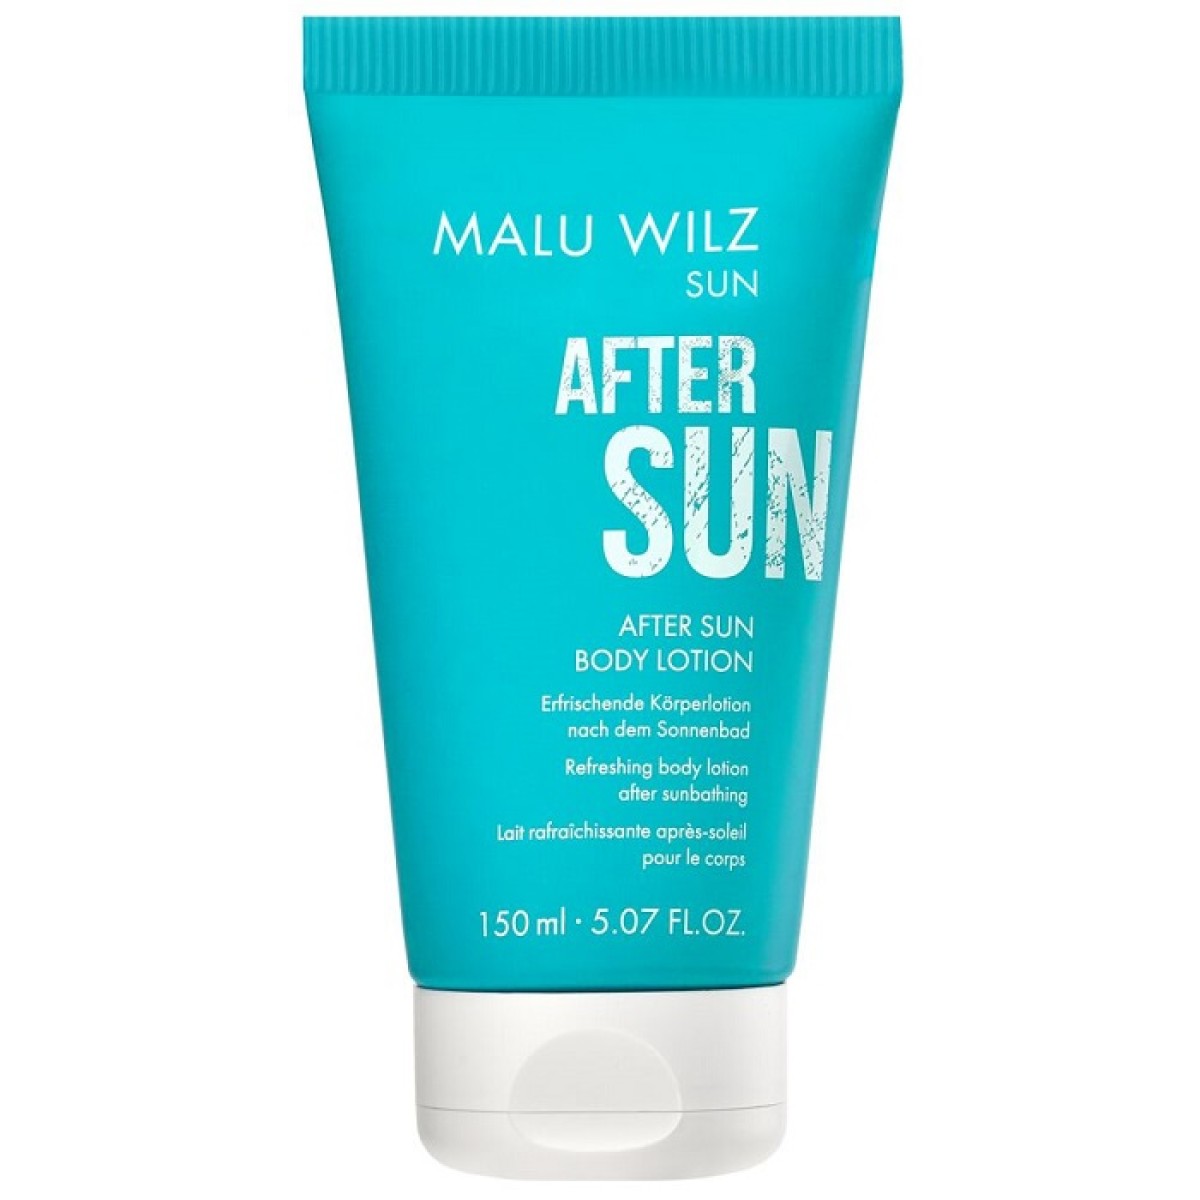 After Sun Body Lotion 150 ml.